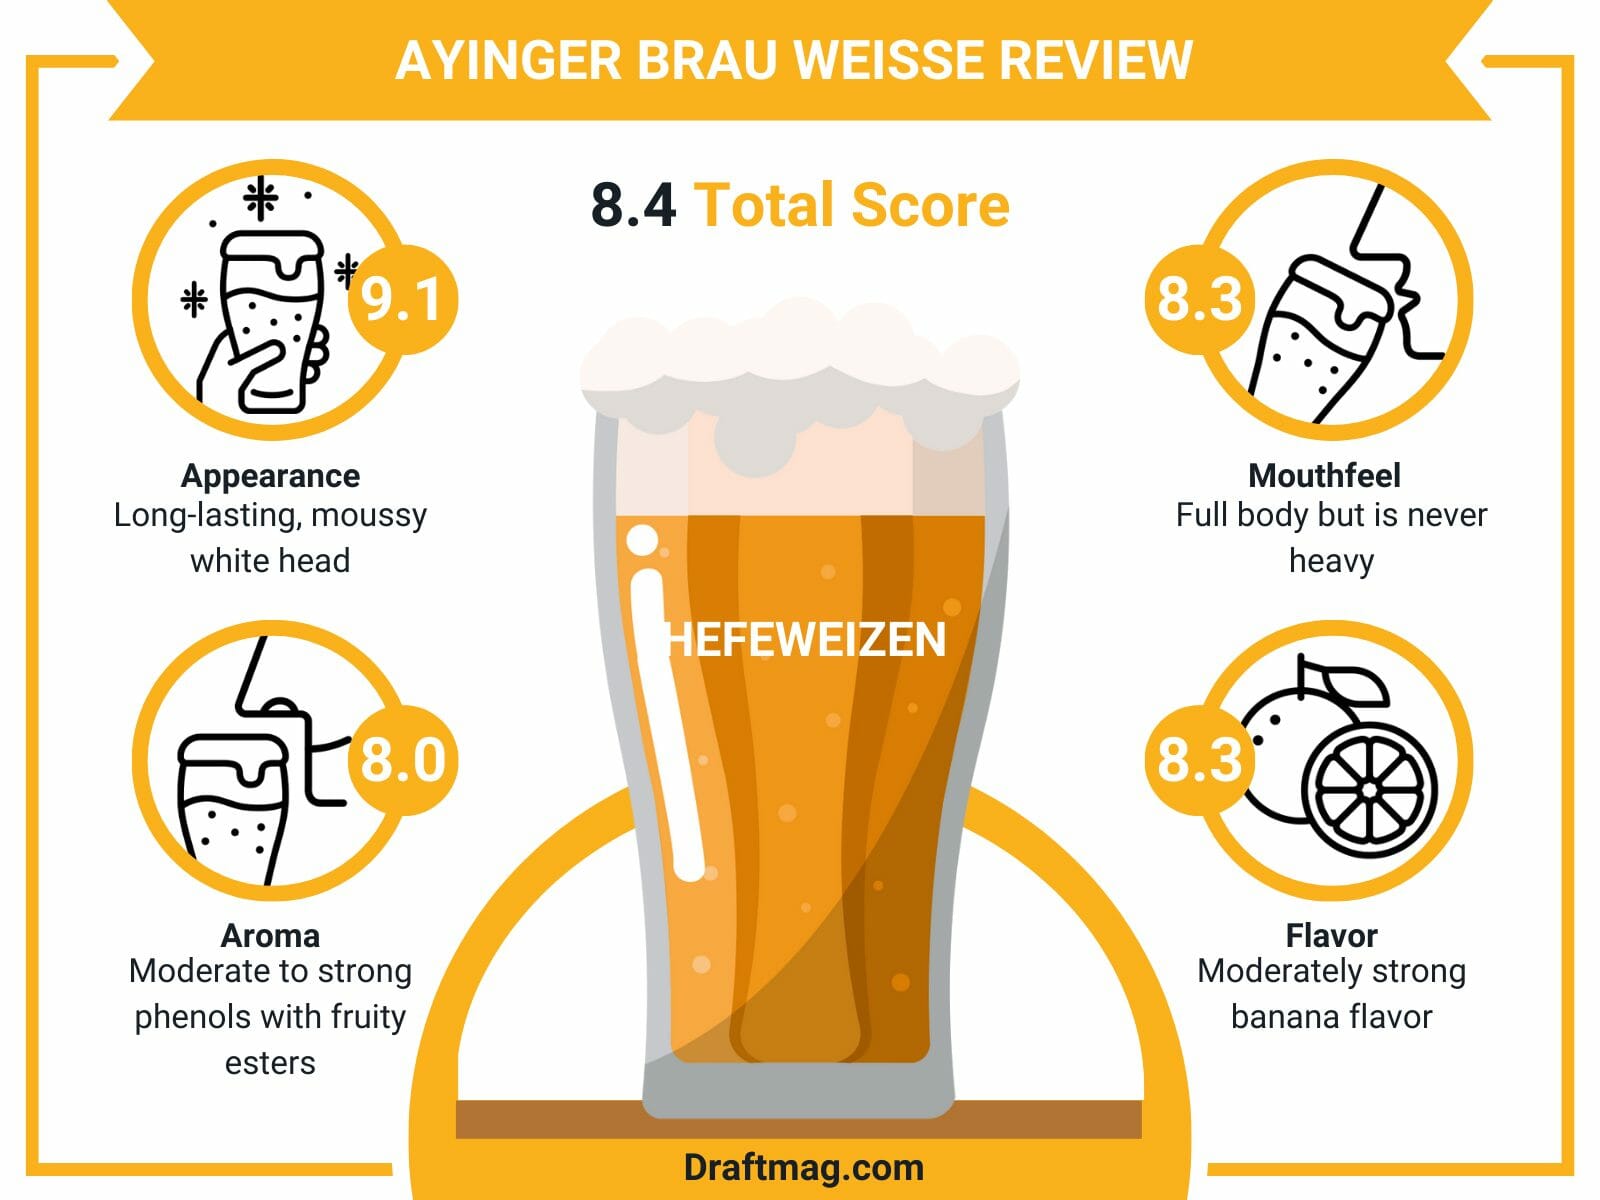 Ayinger brau weisse review infographic